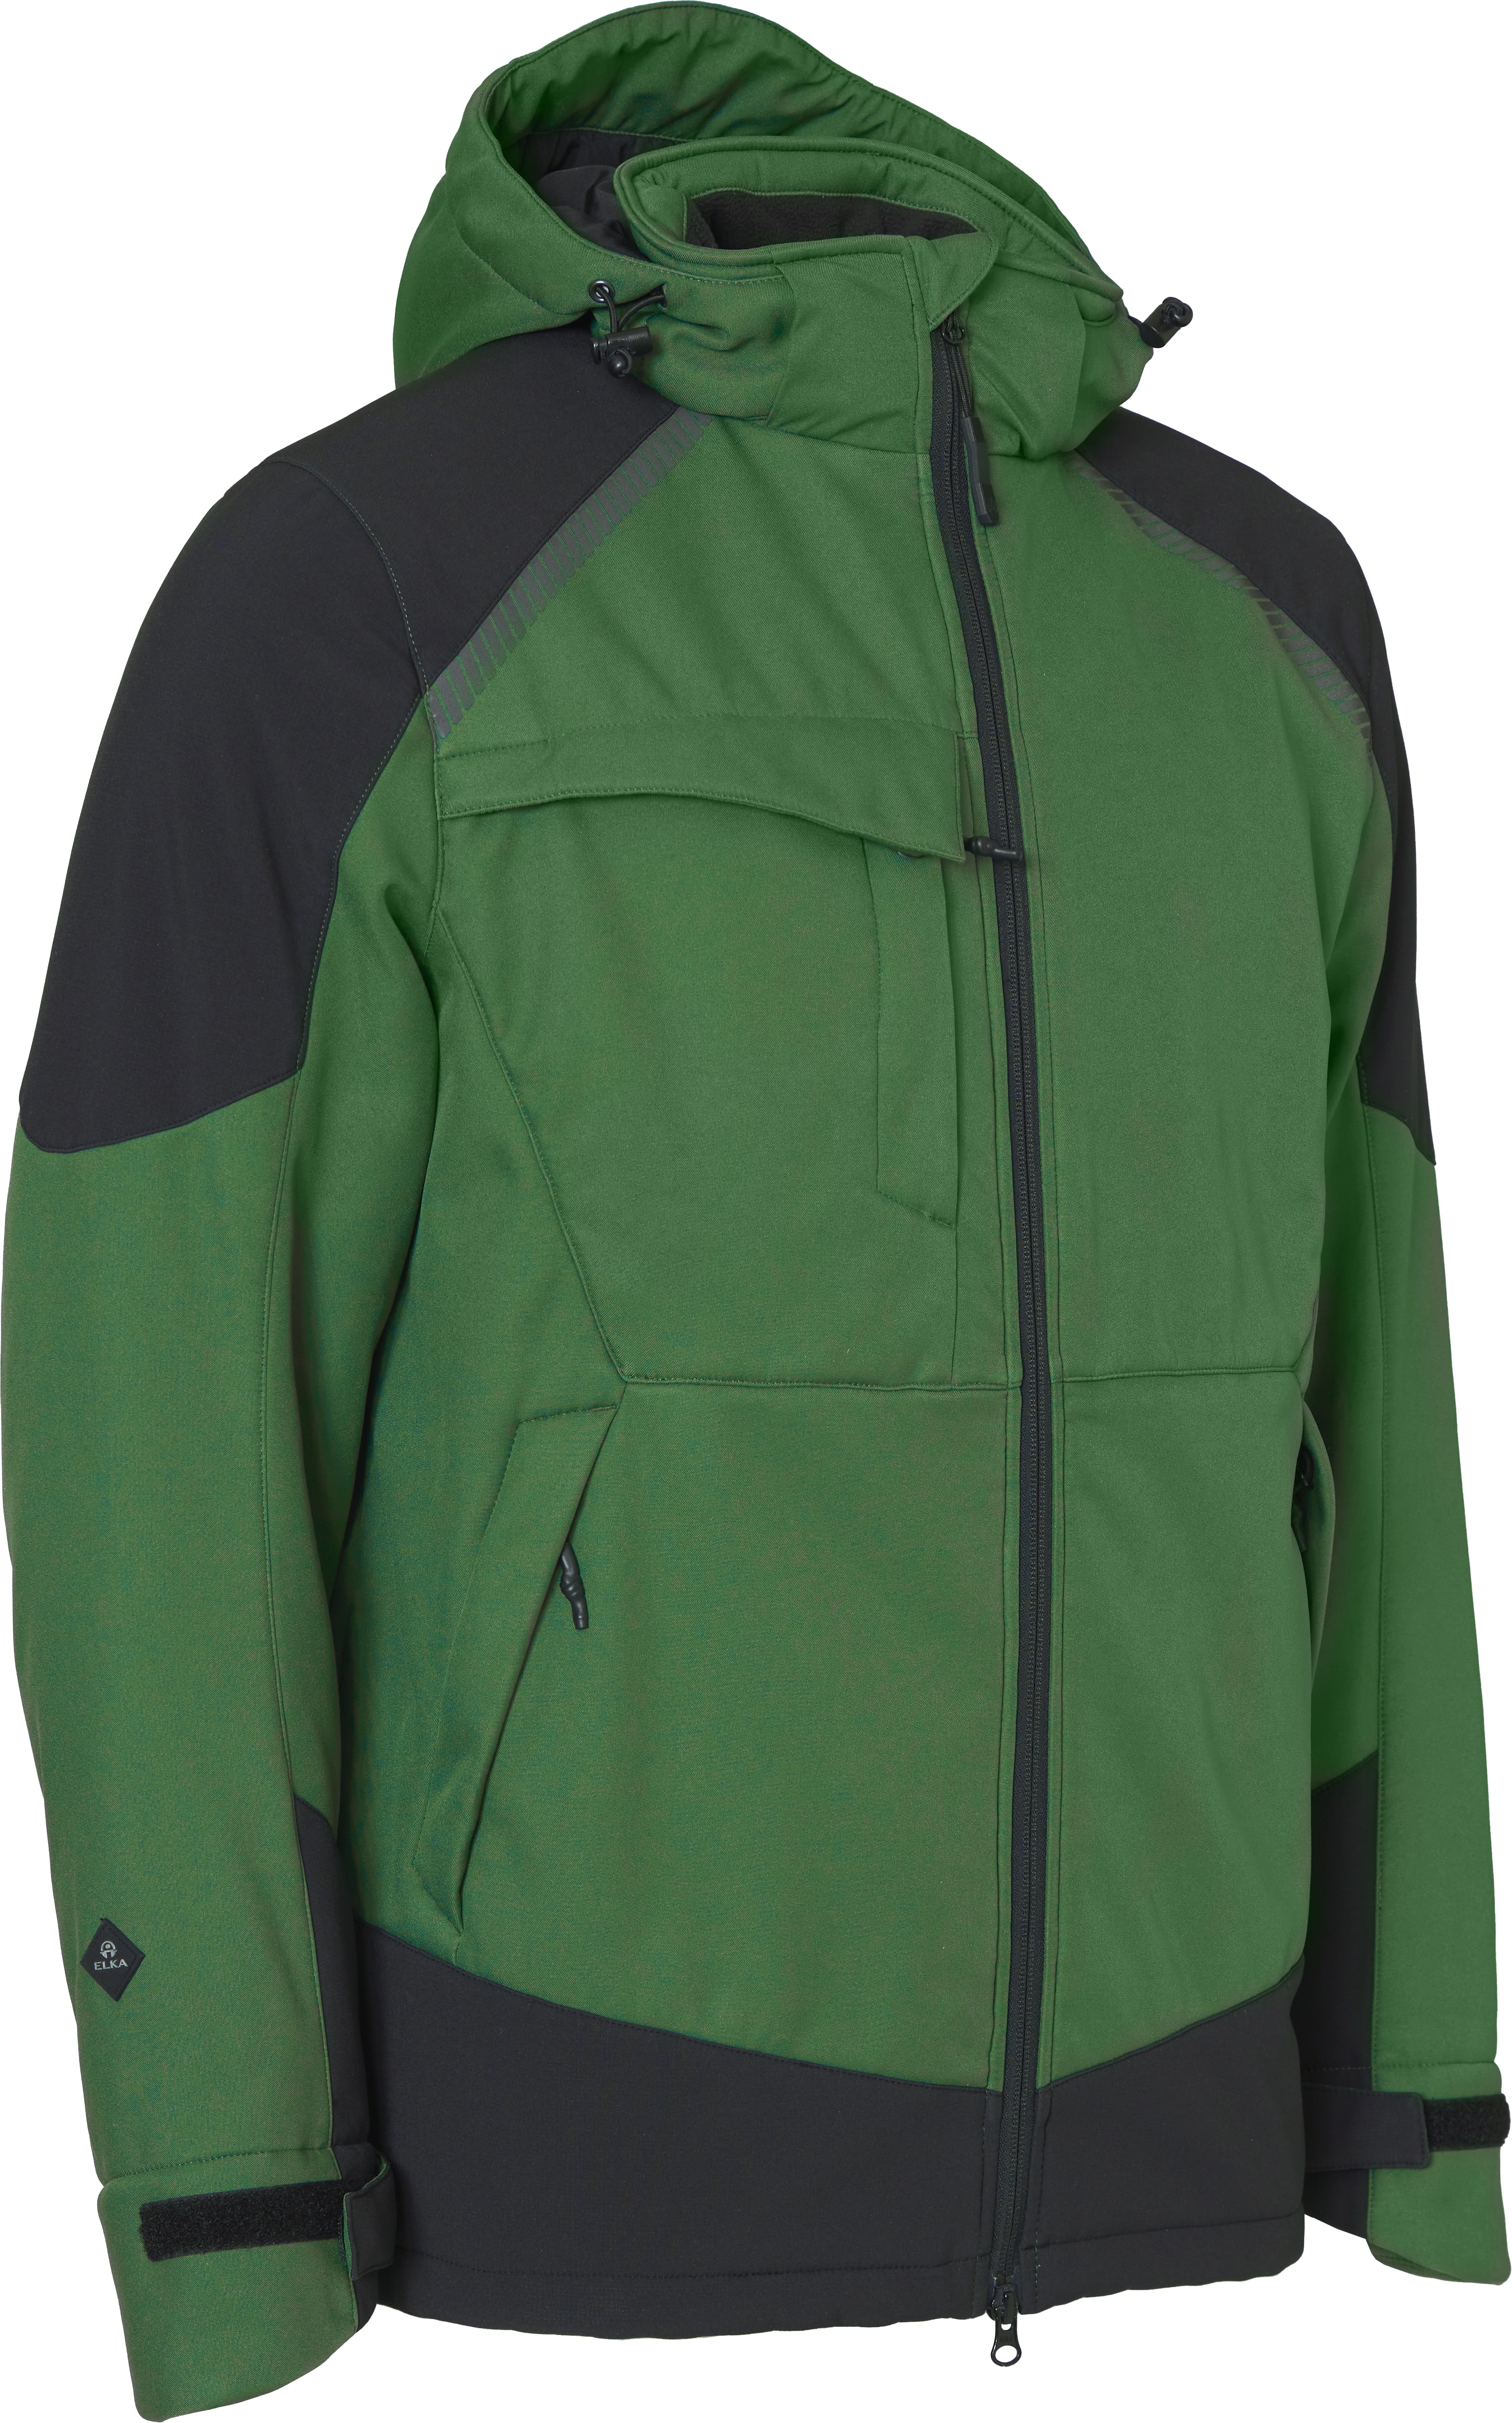 Working Xtreme winter softshell jacket - Breathable and water-repellent - green/black